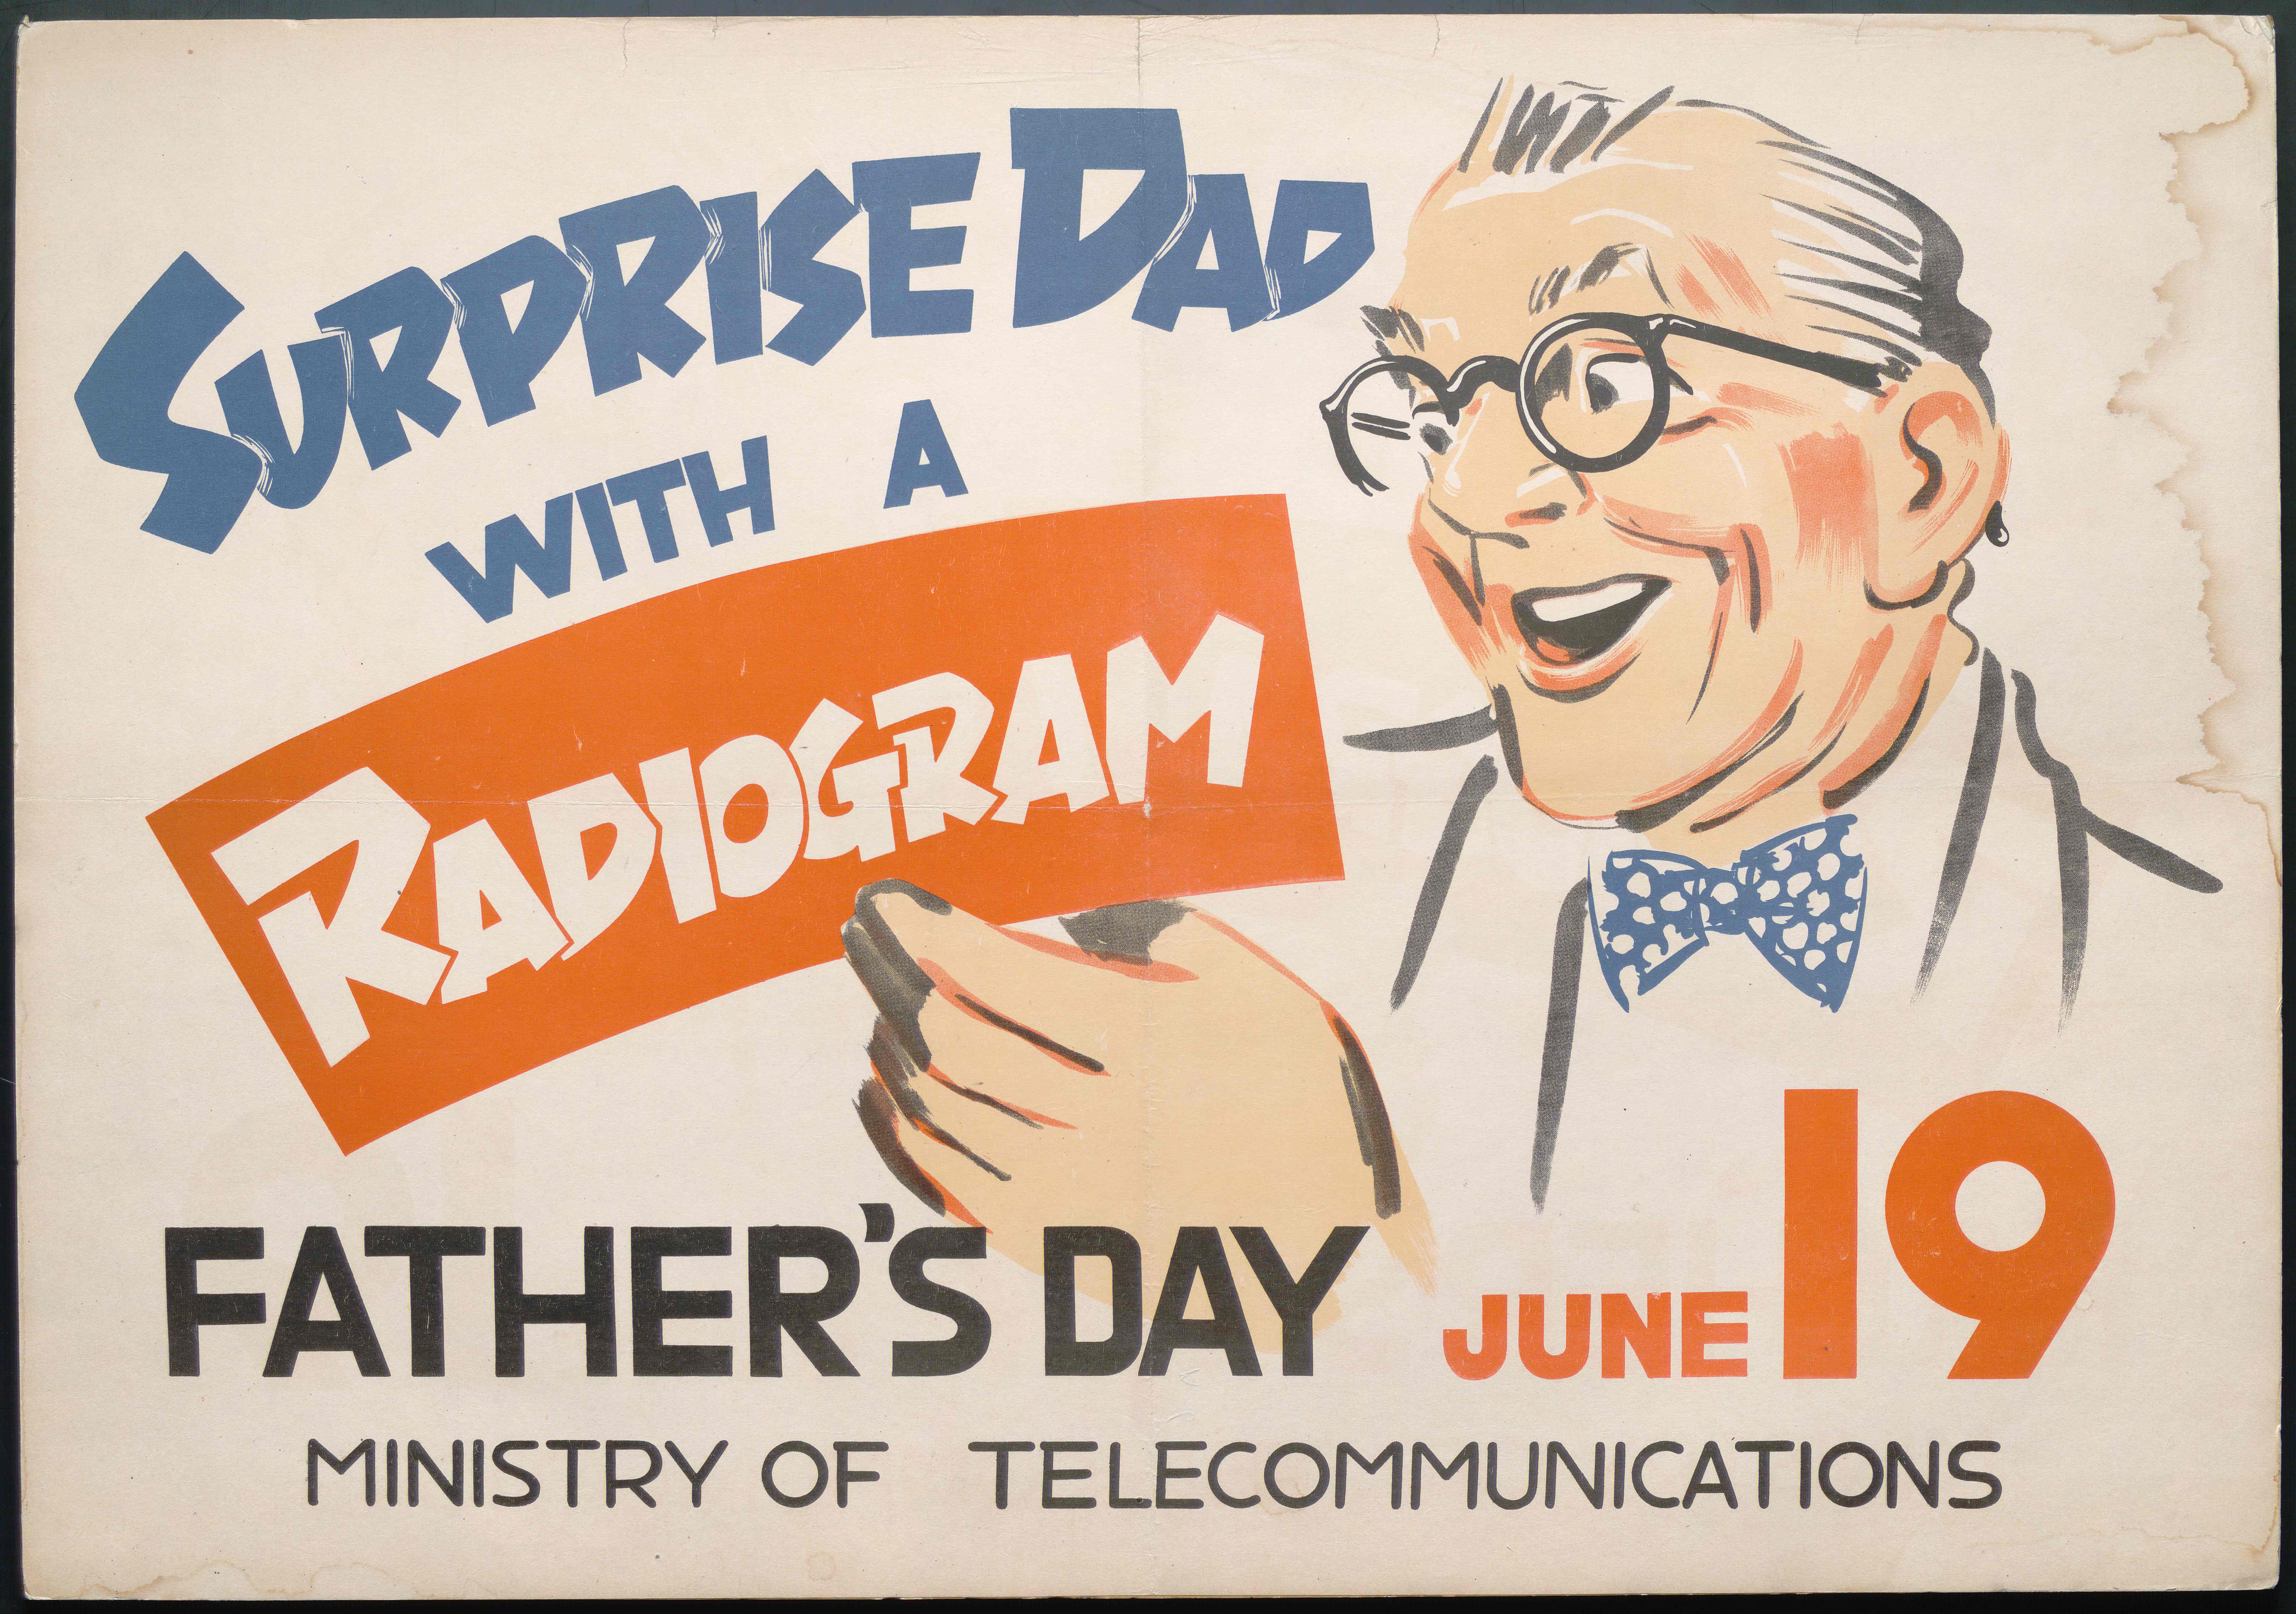   Poster encouraging American and other servicemen in occupied Japan to send telegrams, radiograms, and to make telephone calls for American holidays. Poster shows a man with white hair, glasses, and a bow tie receiving a radiogram. The radiogram is print